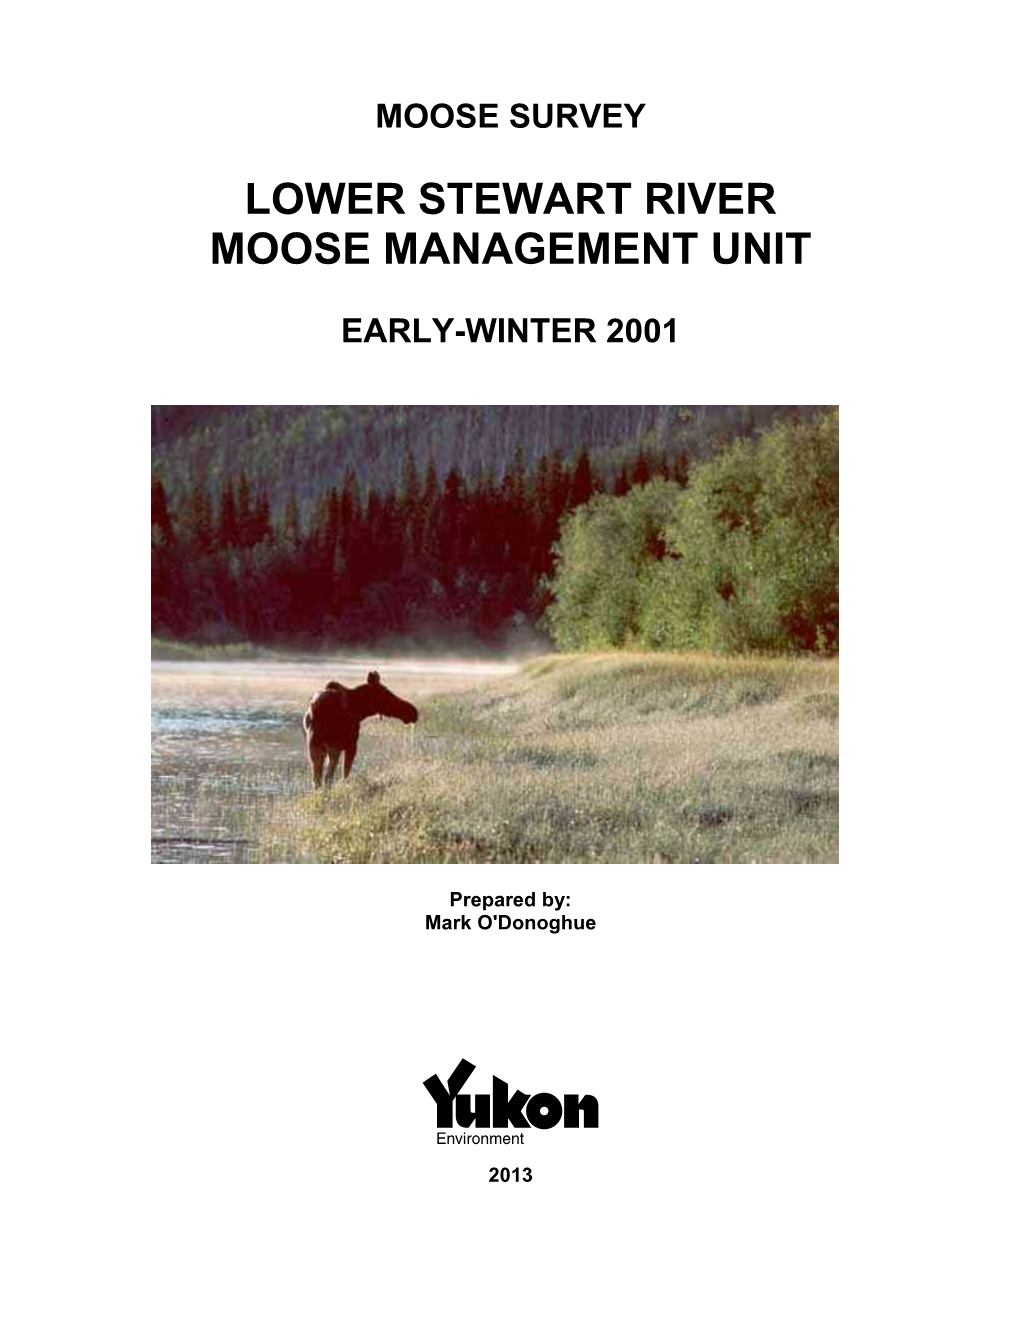 Lower Stewart River Moose Management Unit, Early Winter 2001